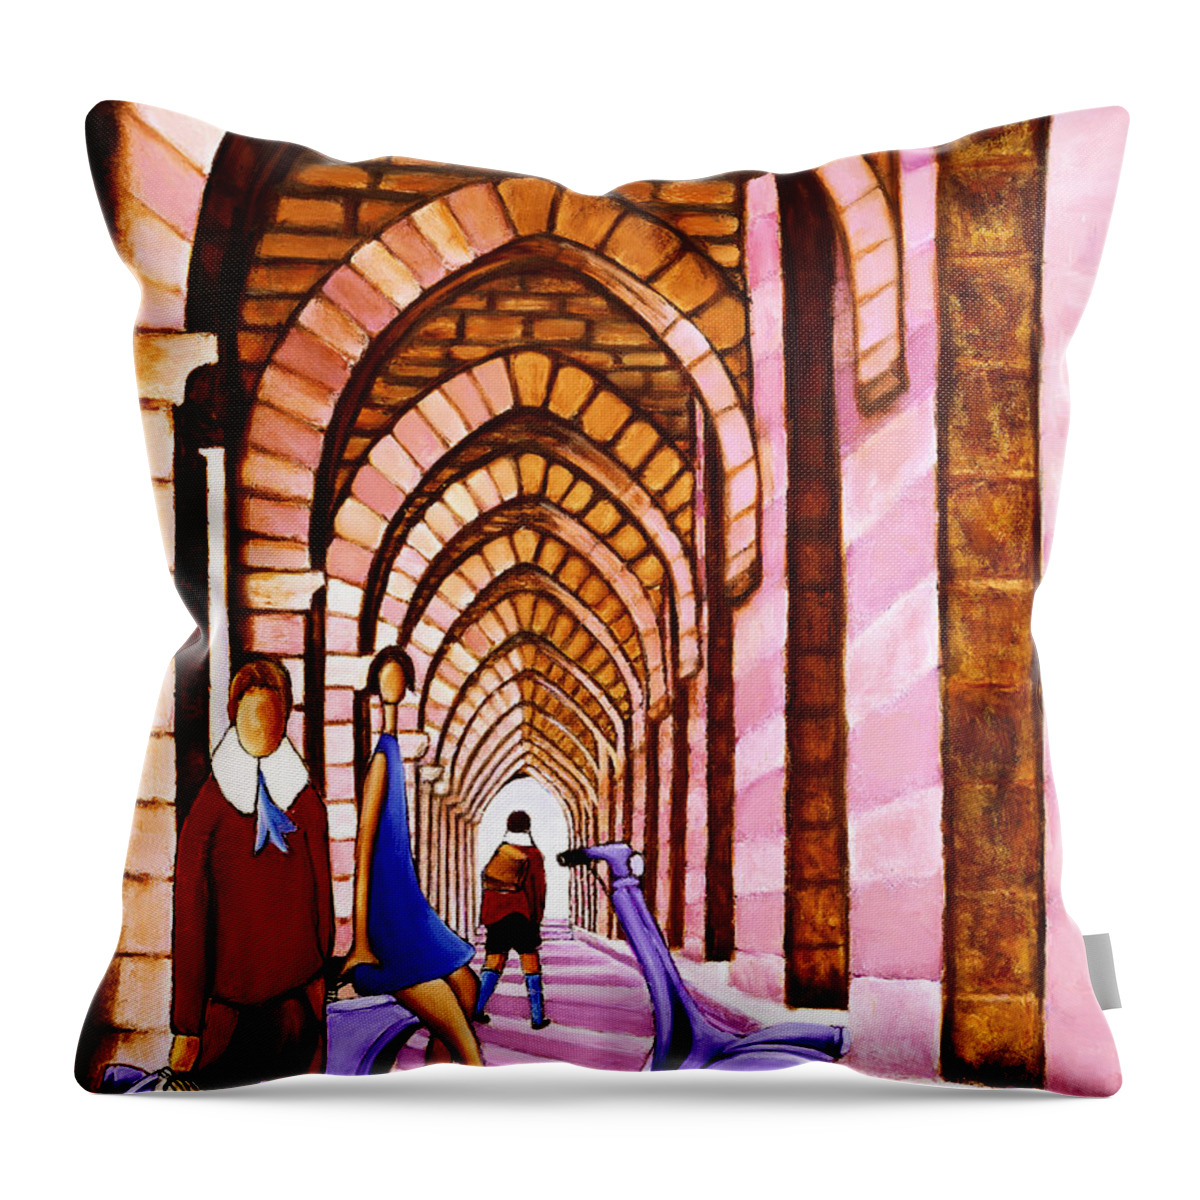 Mediterranean Village Life Throw Pillow featuring the painting Arches Vespa And Flower Girl by William Cain